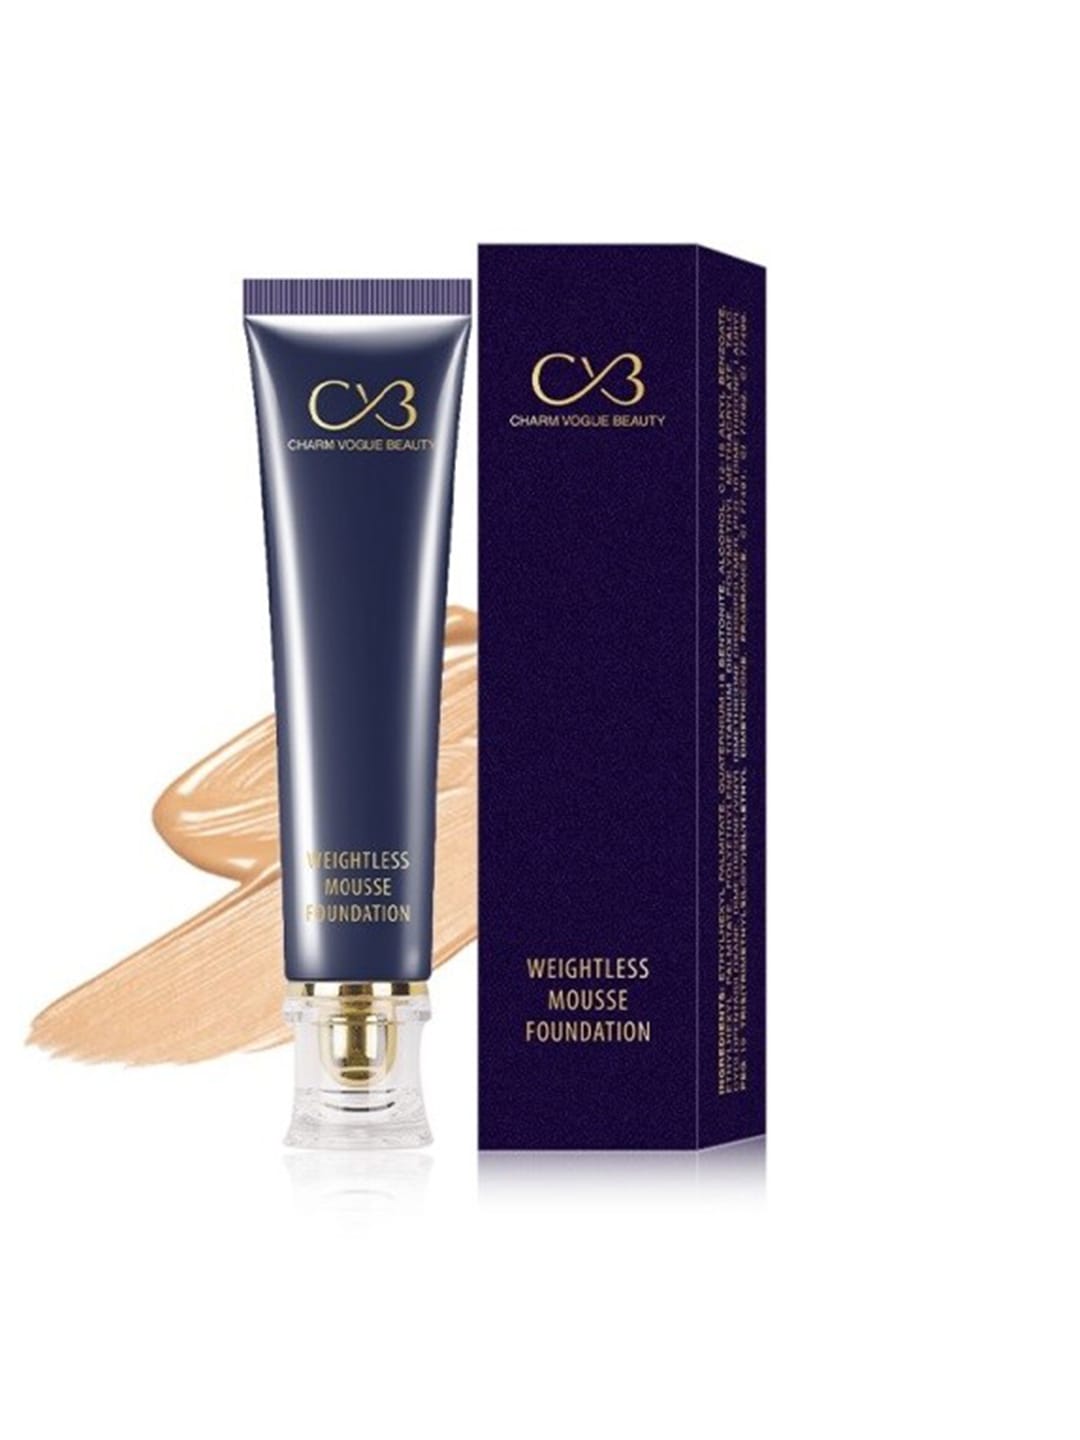 CVB Weightless Mousse Foundation - Natural Beige C03 Price in India